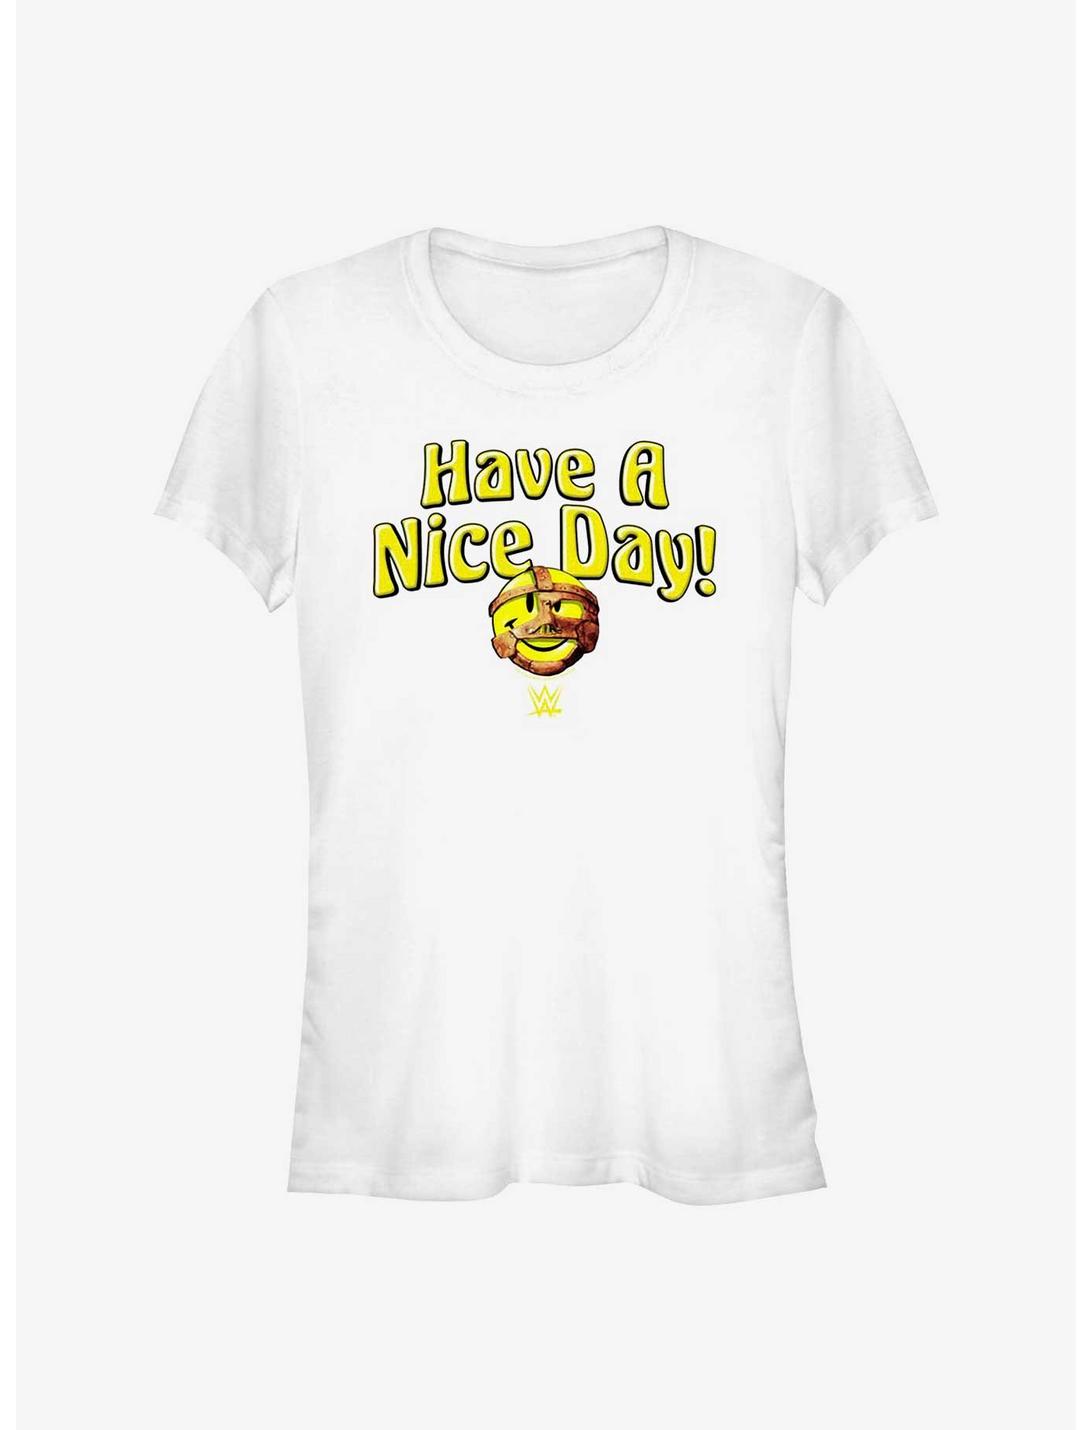 WWE Mick Foley Mankind Have A Nice Day! Icon Girls T-Shirt, WHITE, hi-res